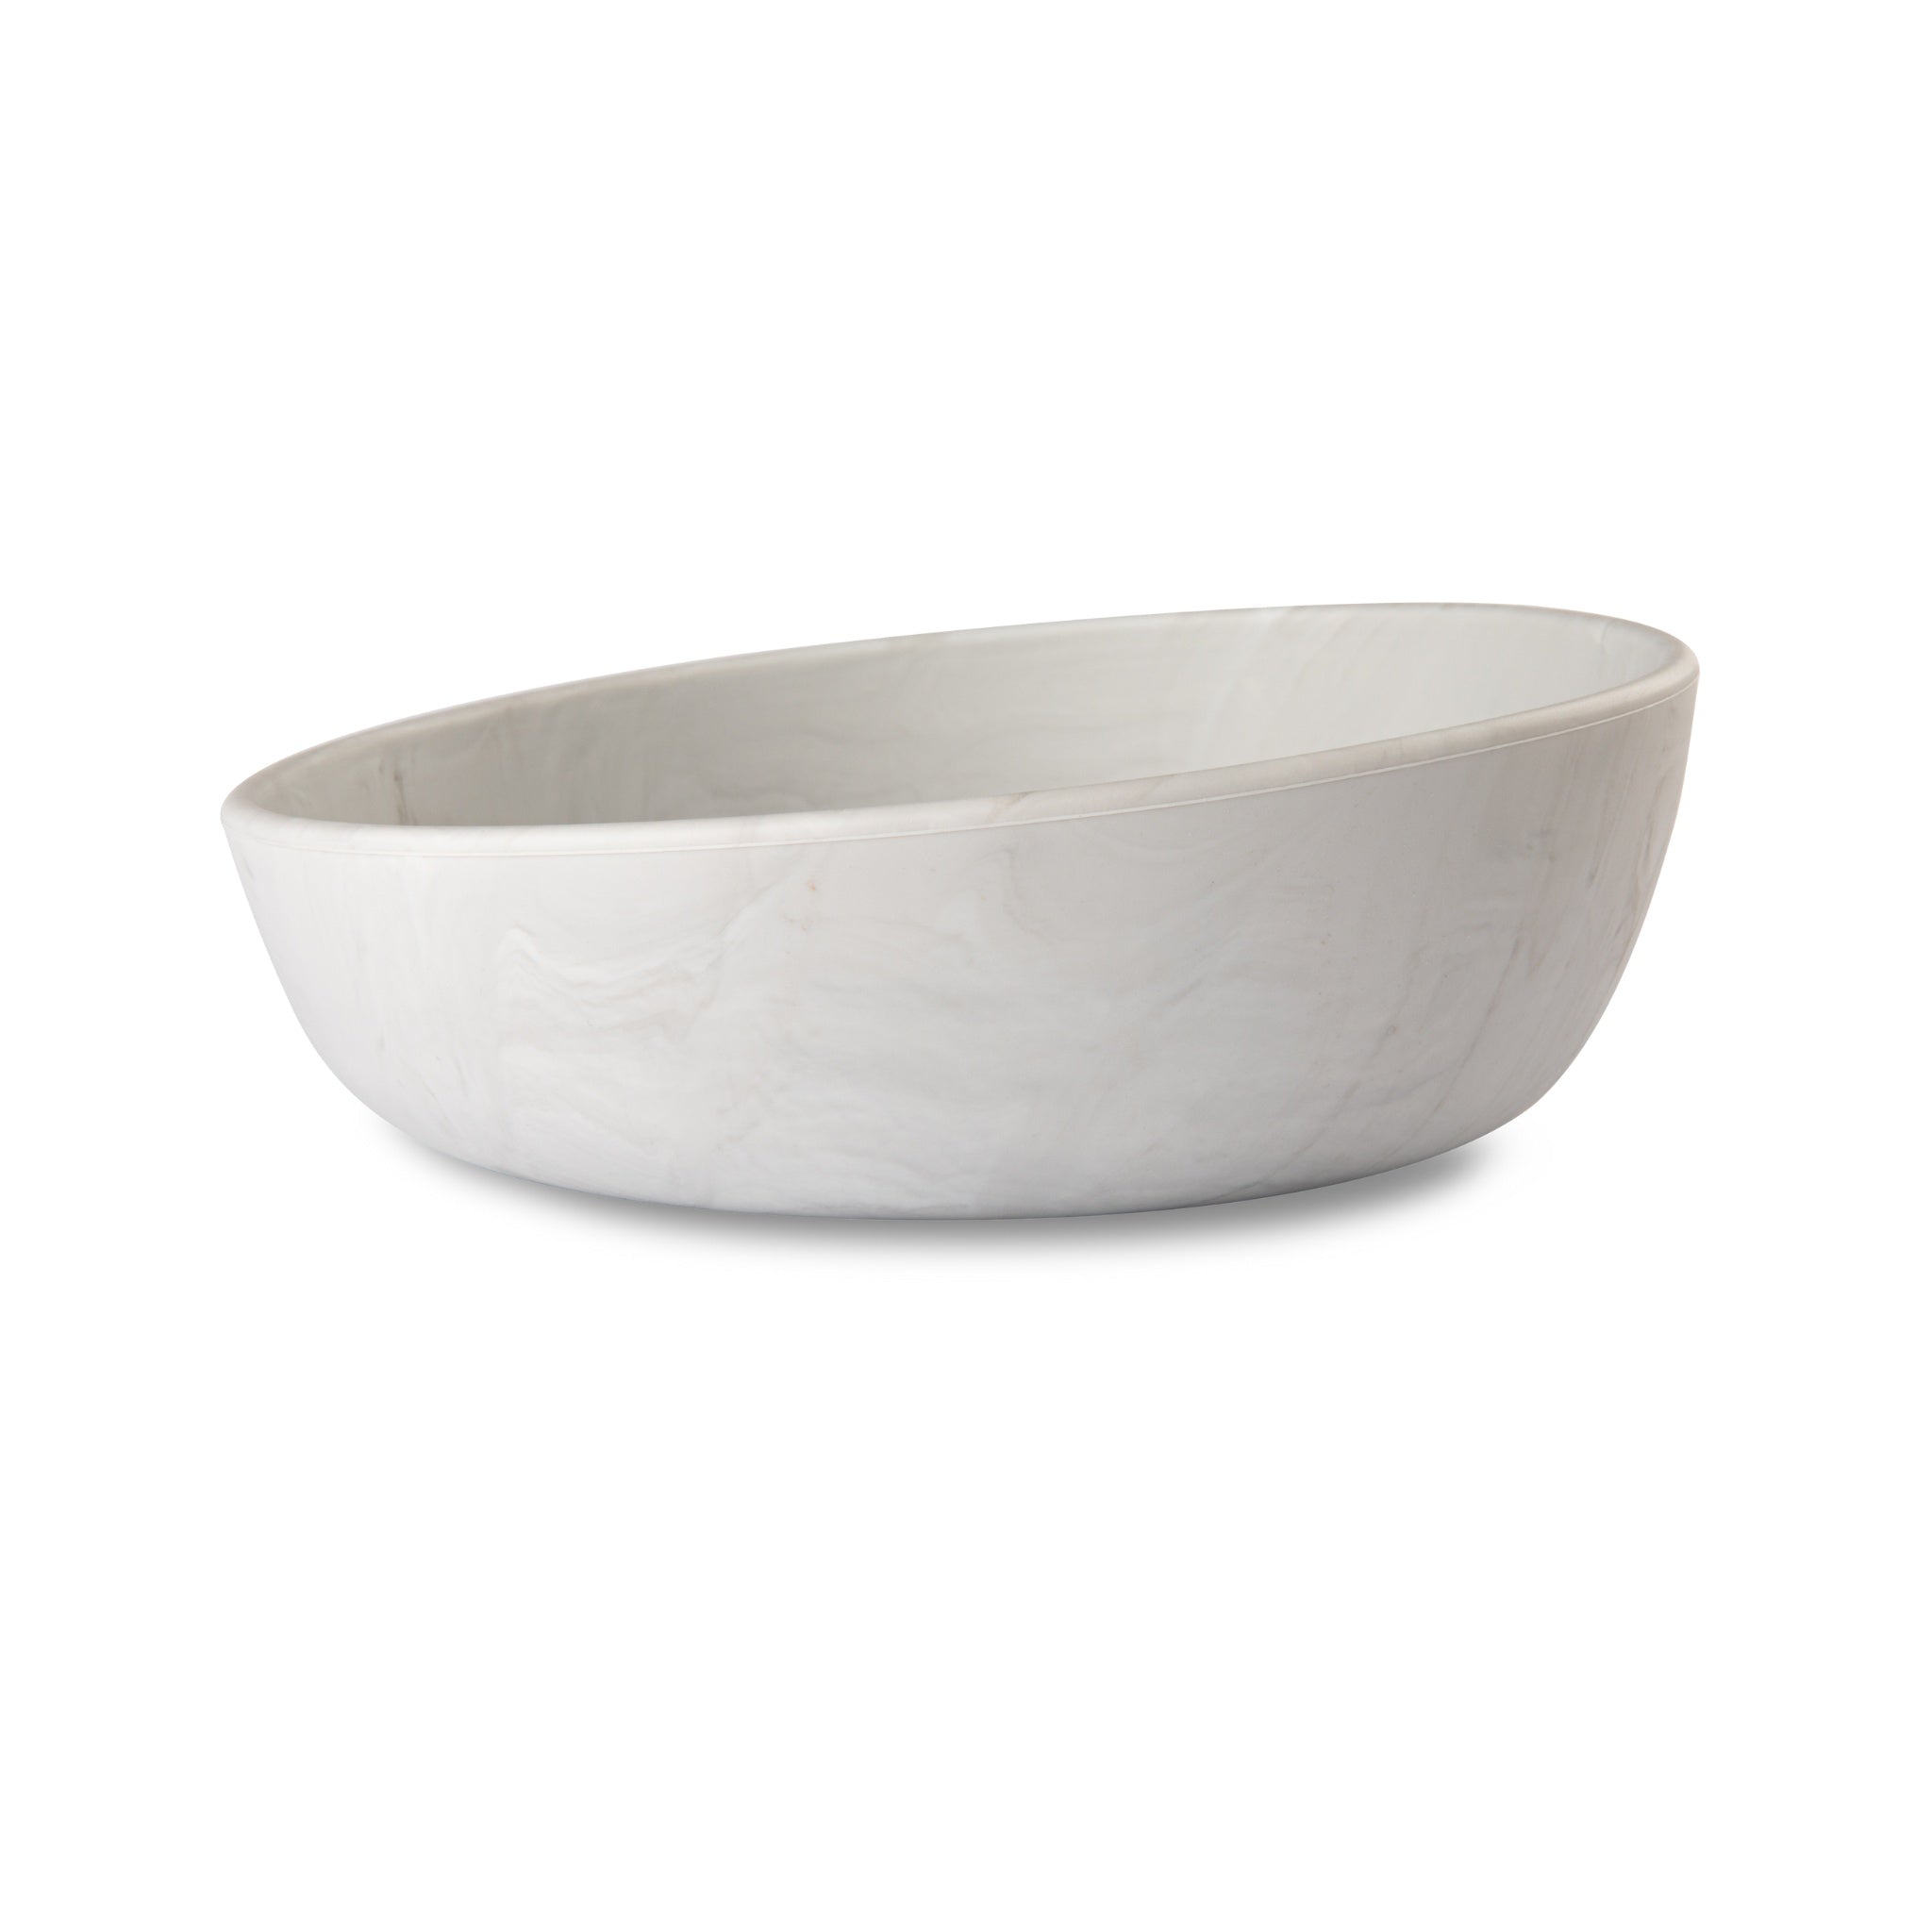 *eeveve* Silicone Bowl large シリコンボウル L - Marble - Cloudy Gray